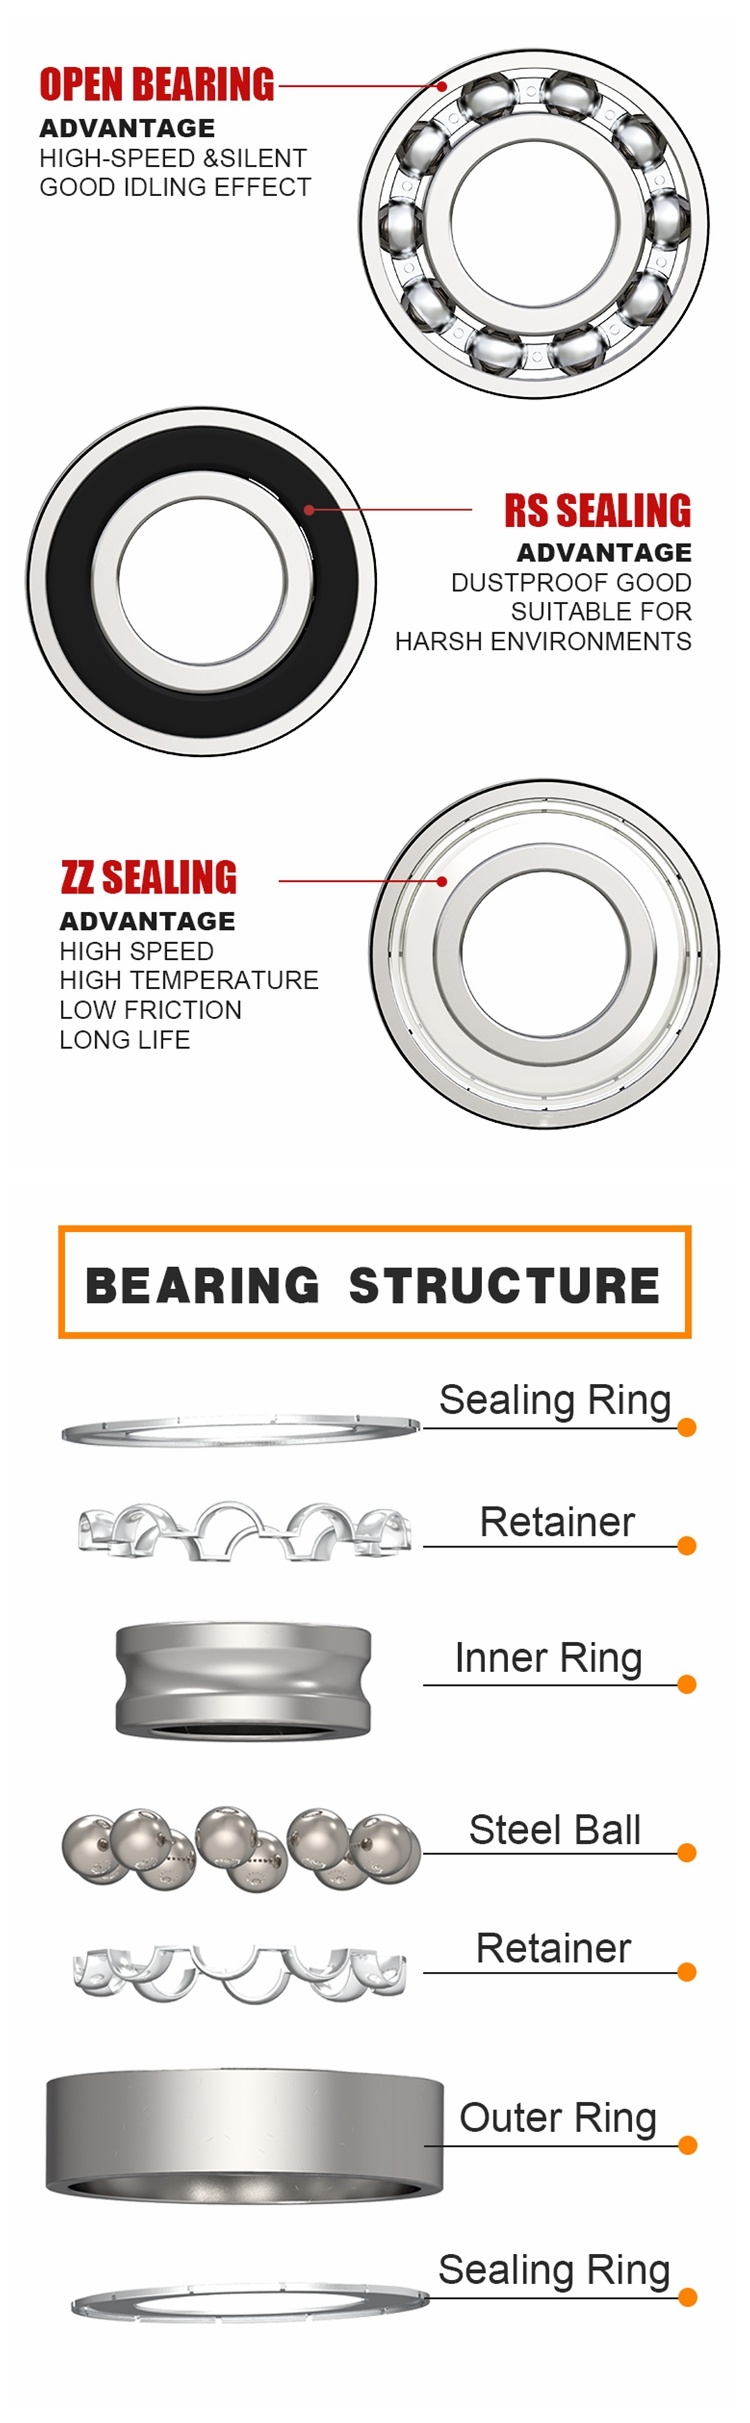 Metal Shielded Spindle Bearing Z3 V3 F6800 Flanged Ball Bearing